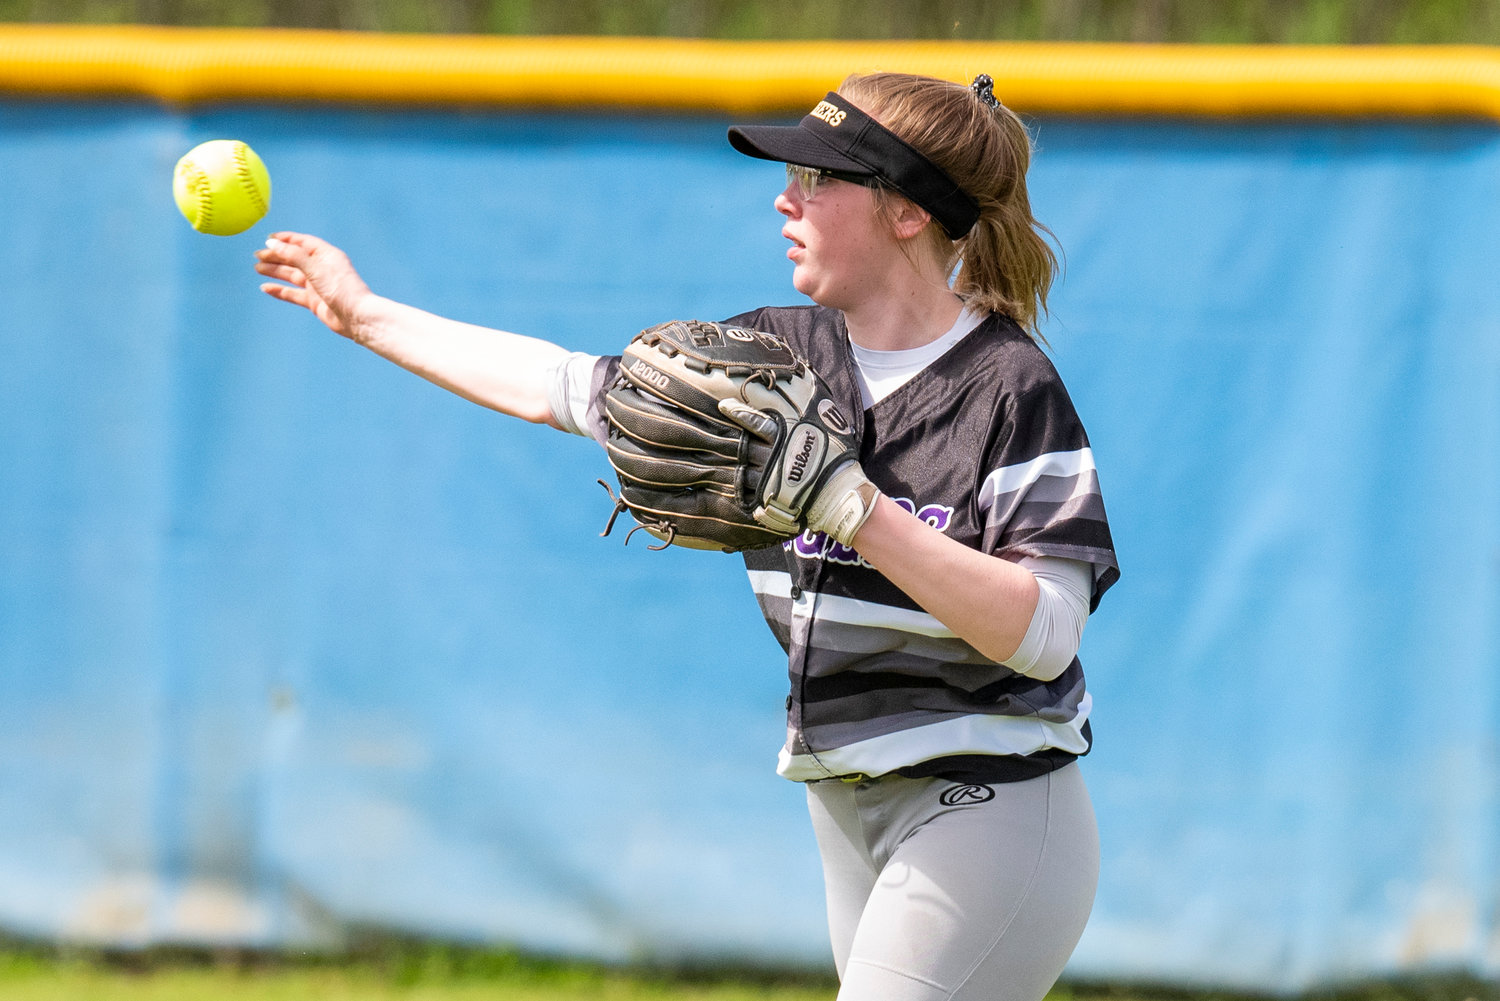 Onalaska's Hannah James makes a throw from center field during a road game at Adna on May 4.